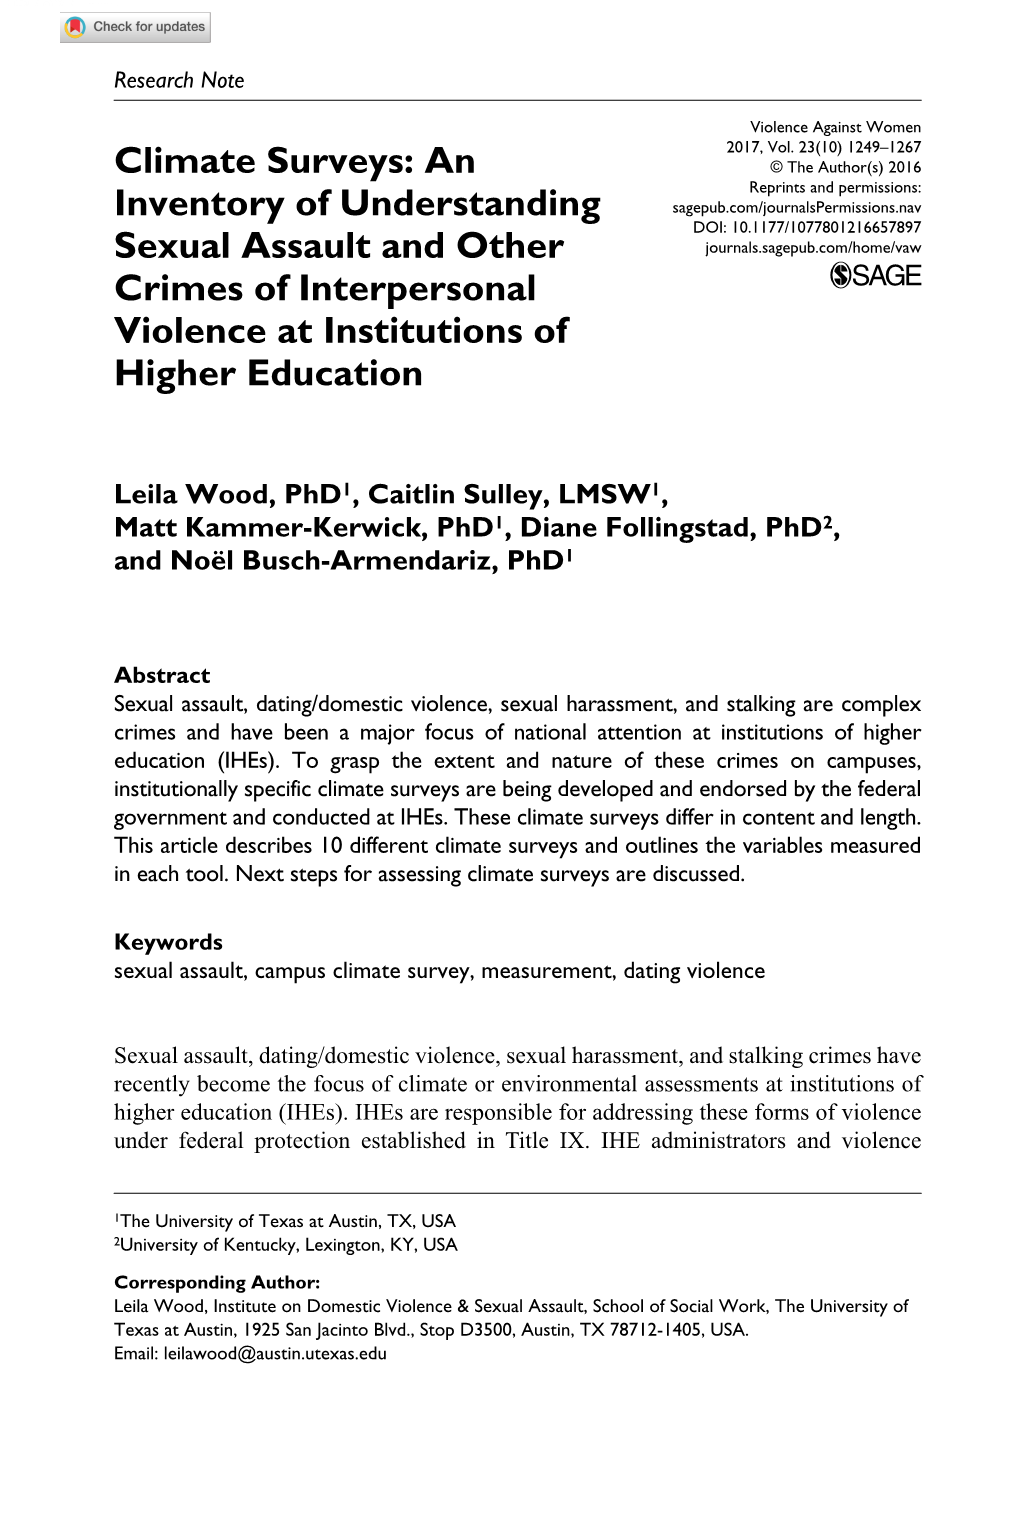 Climate Surveys: an Inventory of Understanding Sexual Assault and Other Crimes of Interpersonal Violence at Institutions of High